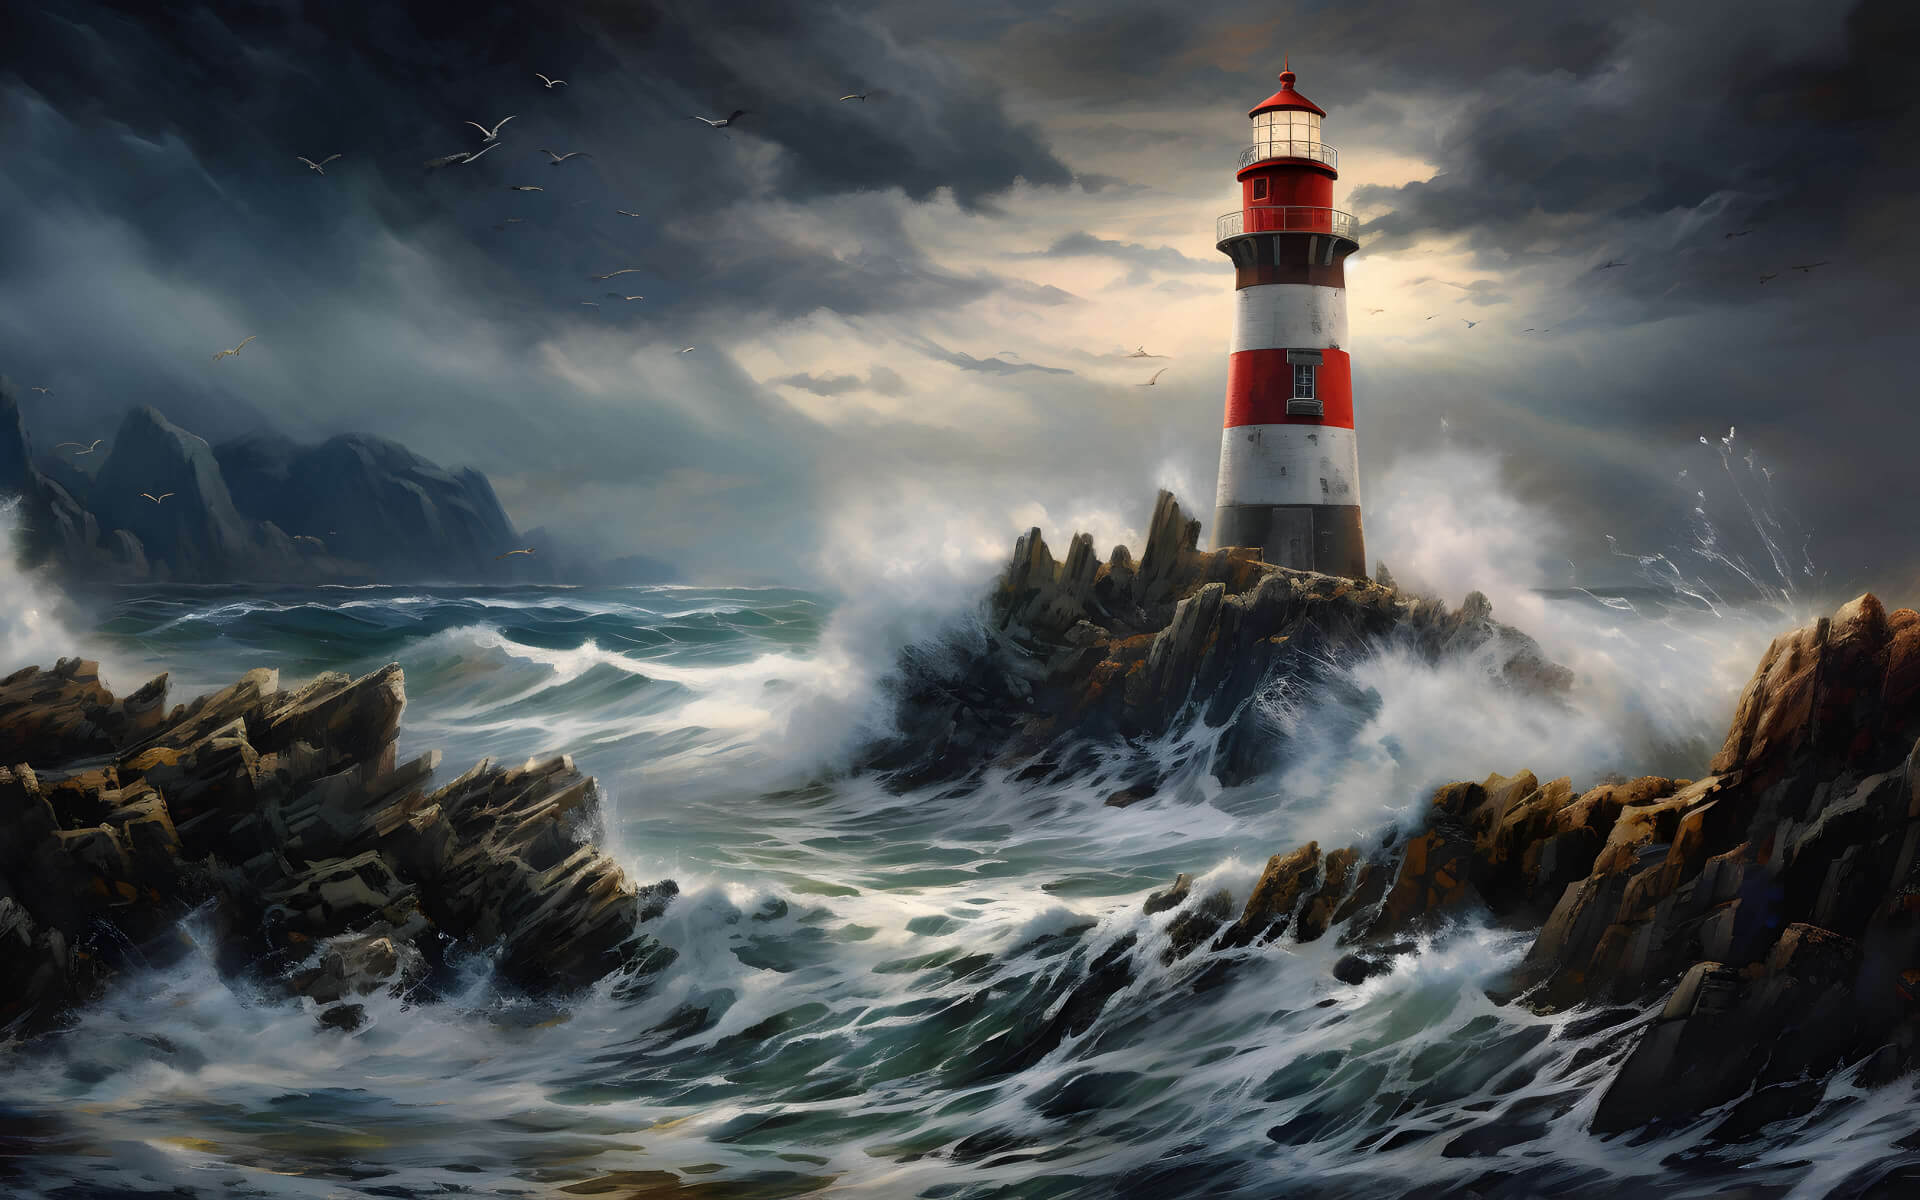 Lighthouse in the ocean waves wallpaper 1280x800